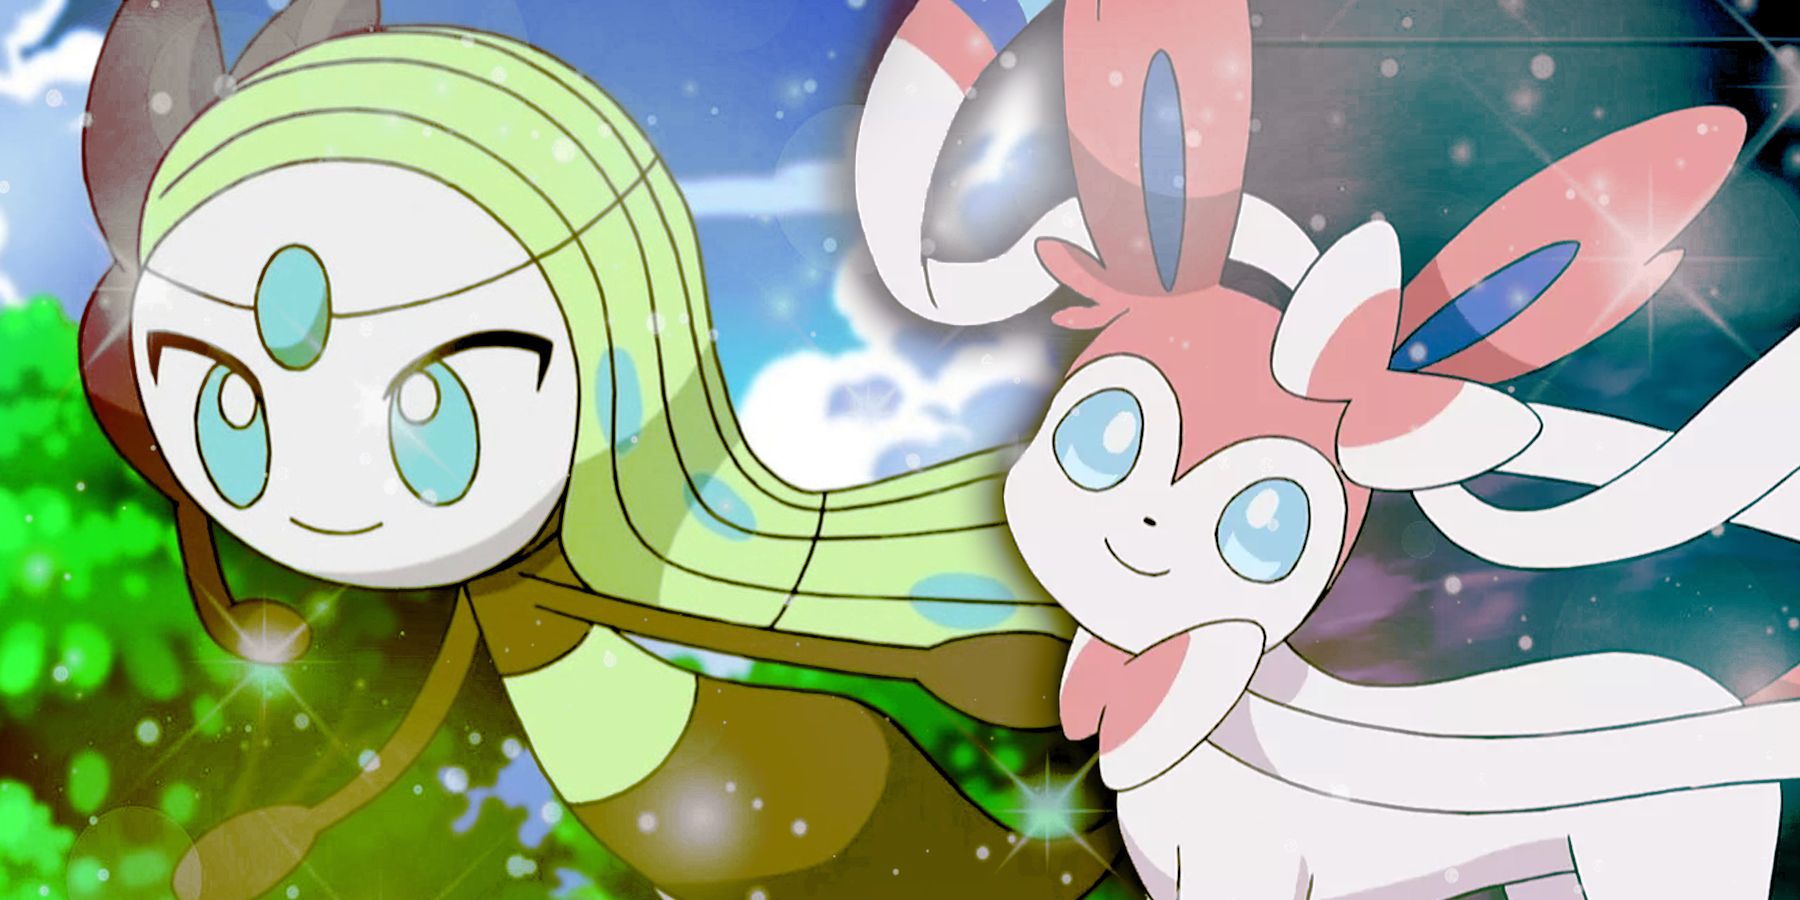 Catching the MOST MAJESTIC Mythical Pokemon MELOETTA in Pixelmon! 